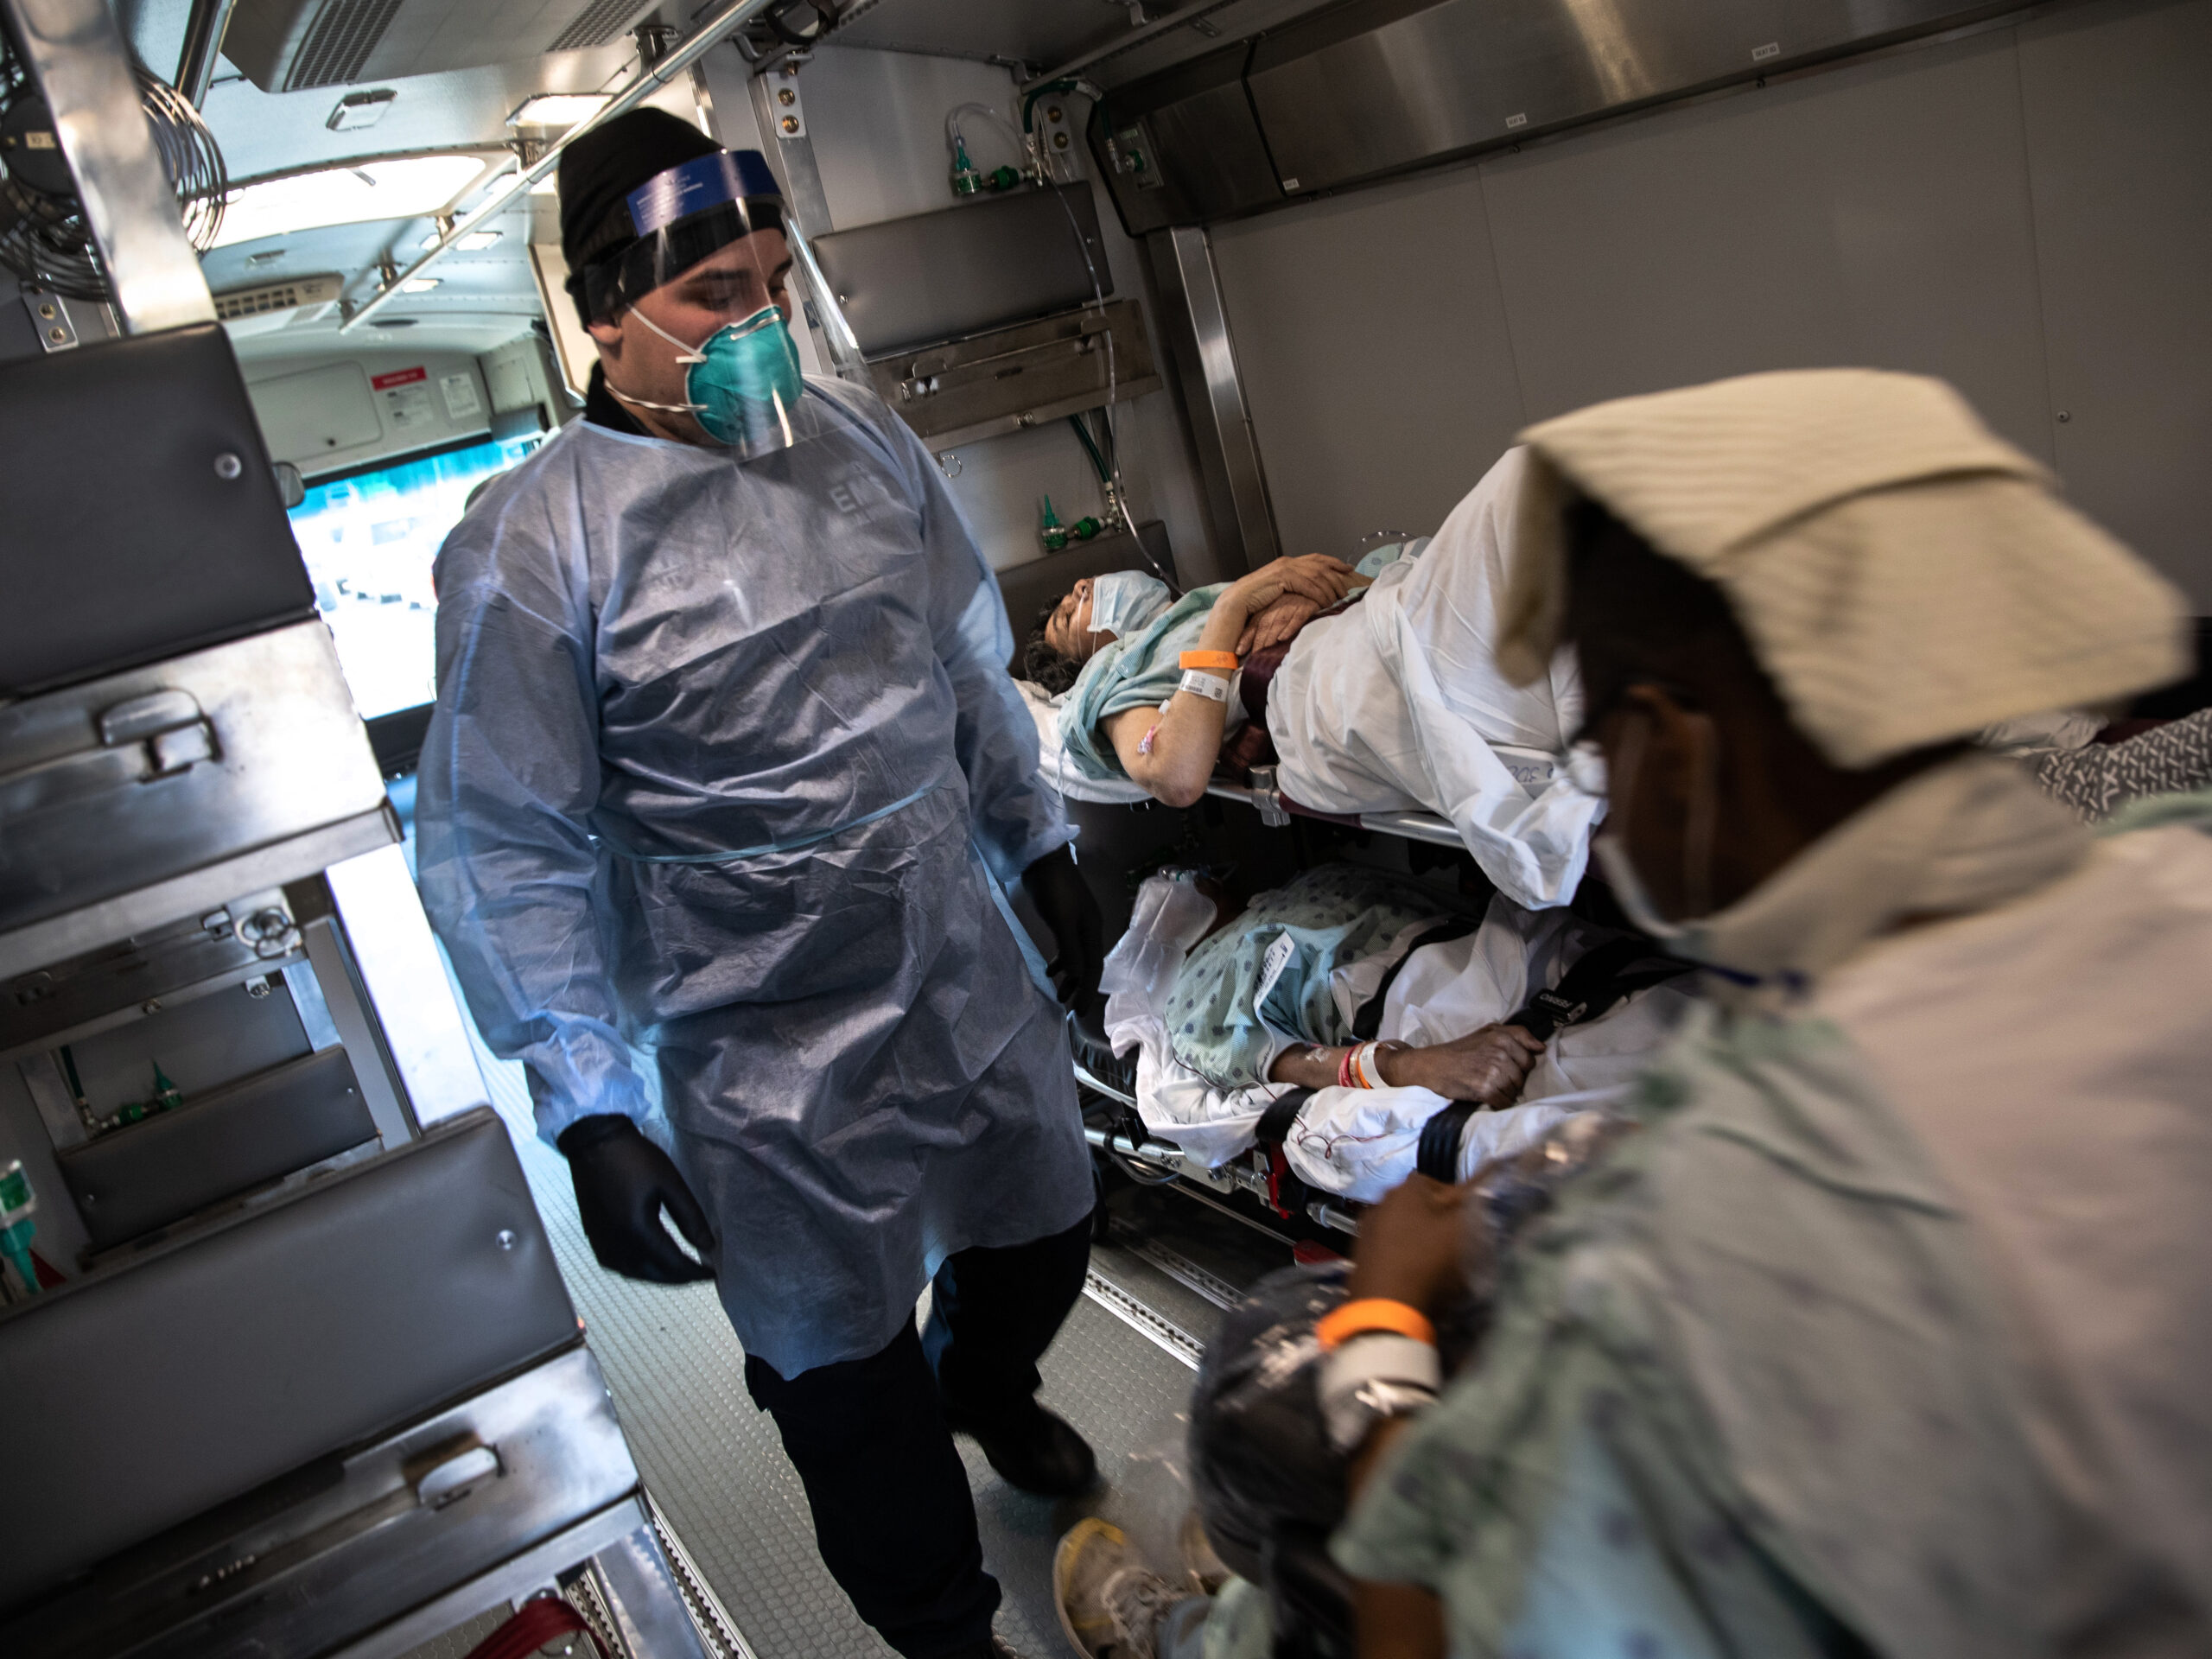 An EMT wearing personal protective equipment prepares to unload COVID-19 transfer patients in the early days of the pandemic. The Biden Administration has just announced a new program aimed at preventing the next pandemic.